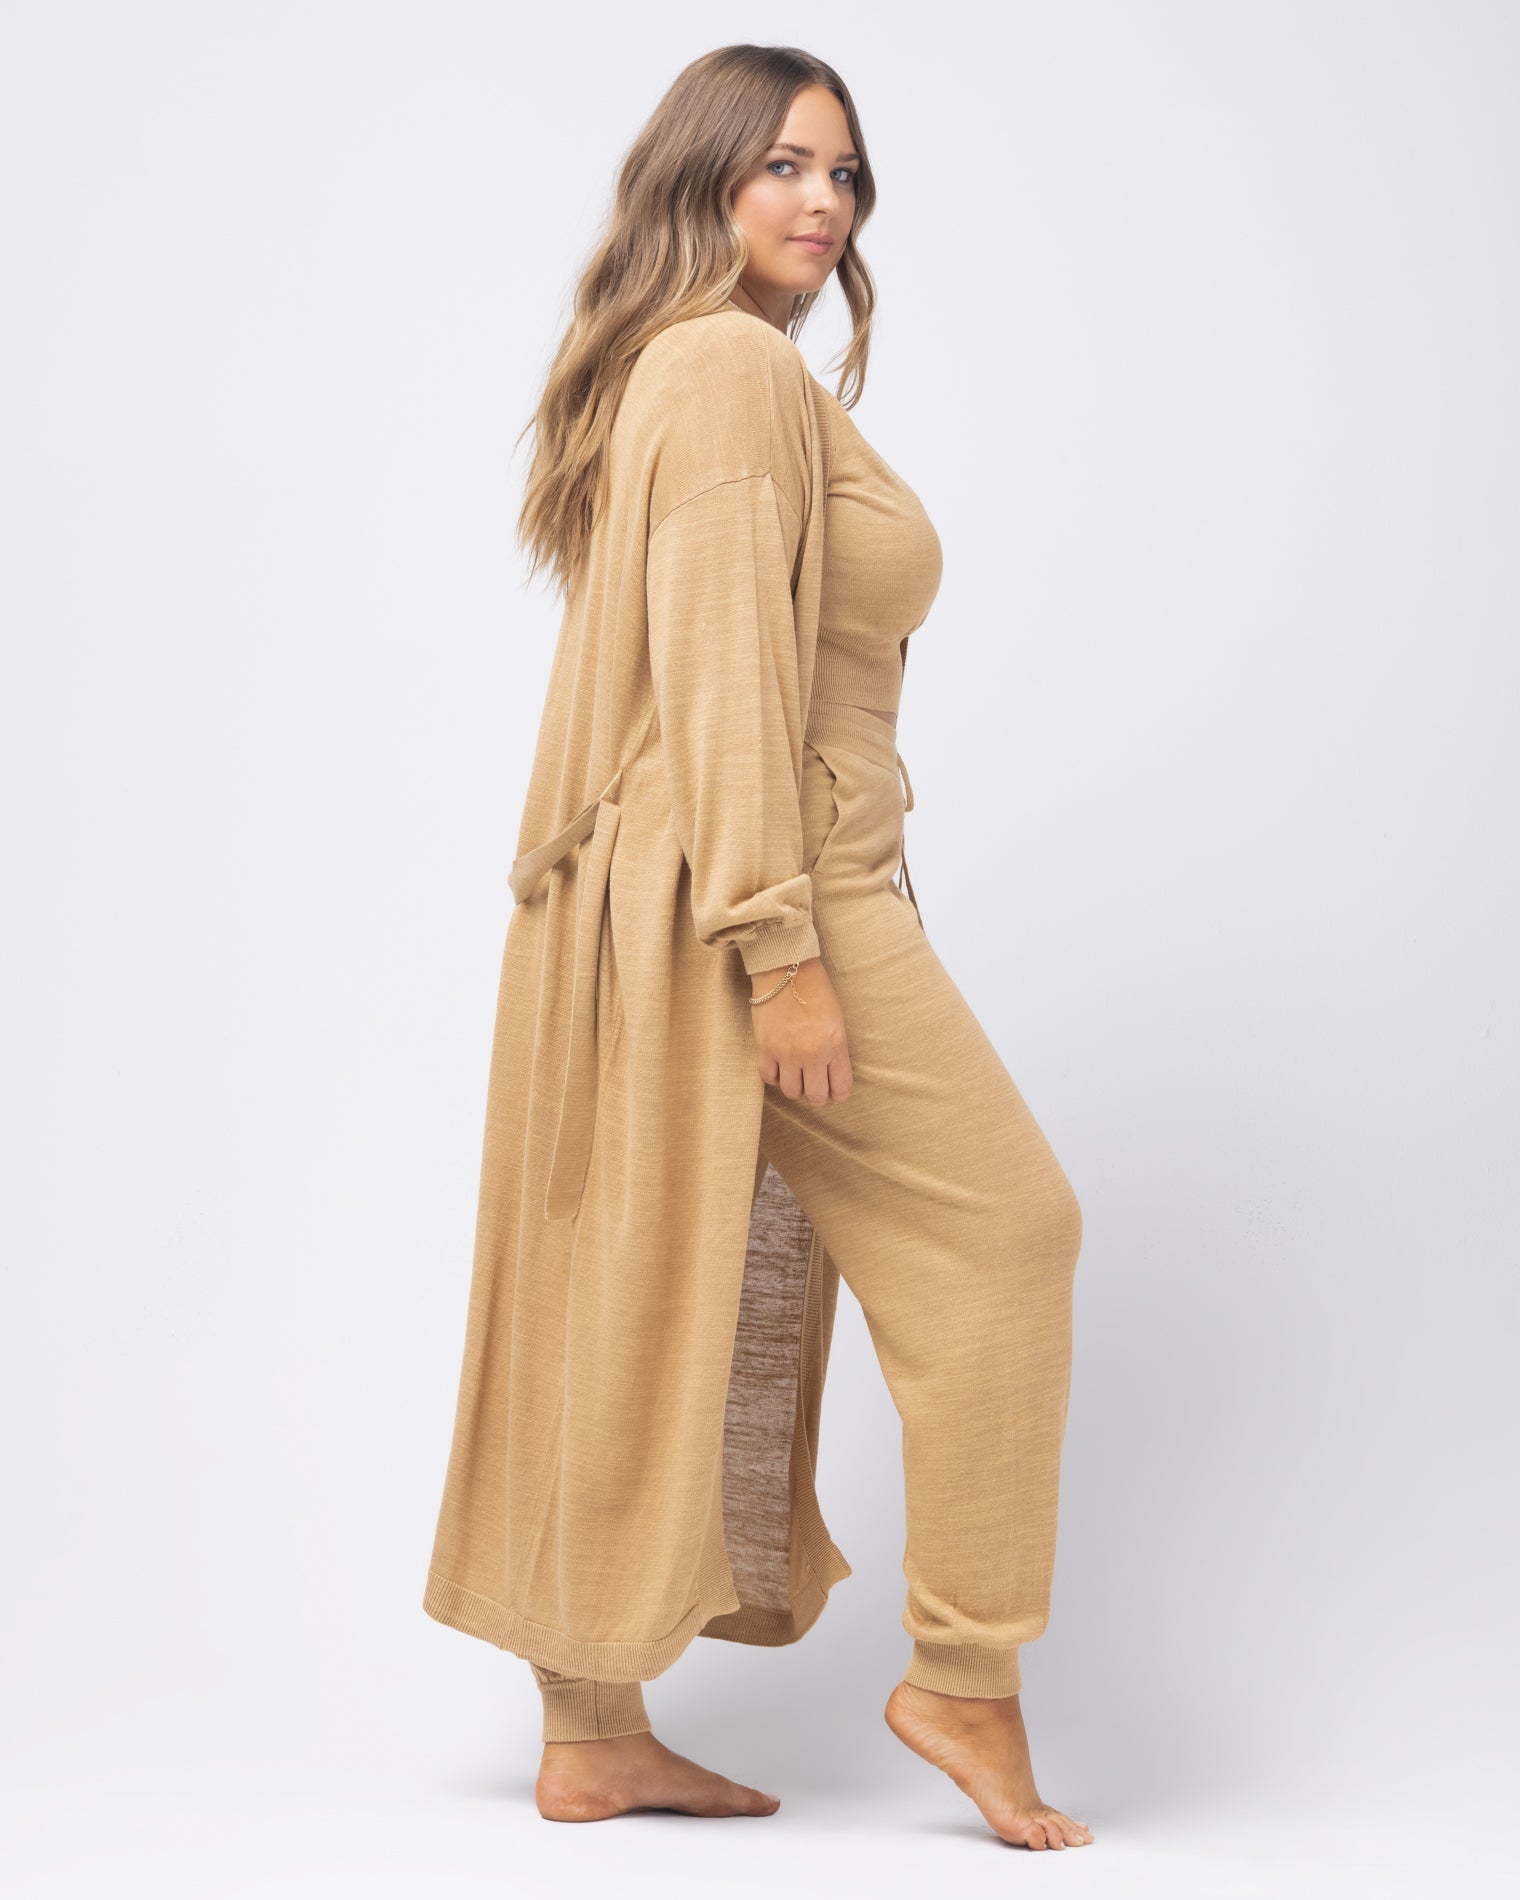 Azores Duster Toffee | Model: Ali (size: XL)